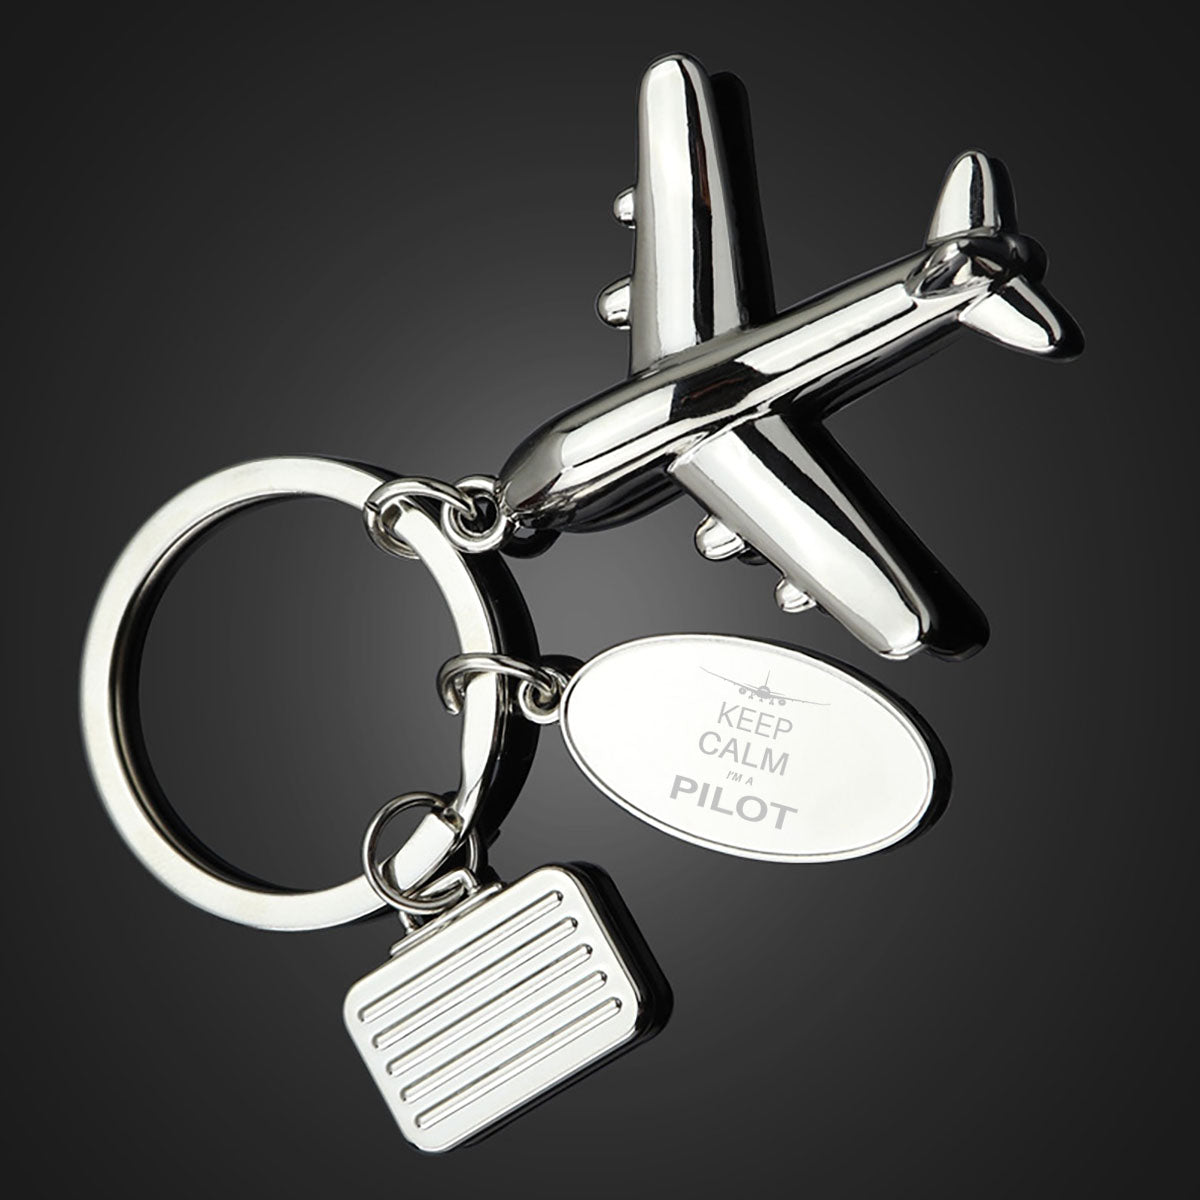 Pilot (777 Silhouette) Designed Suitcase Airplane Key Chains